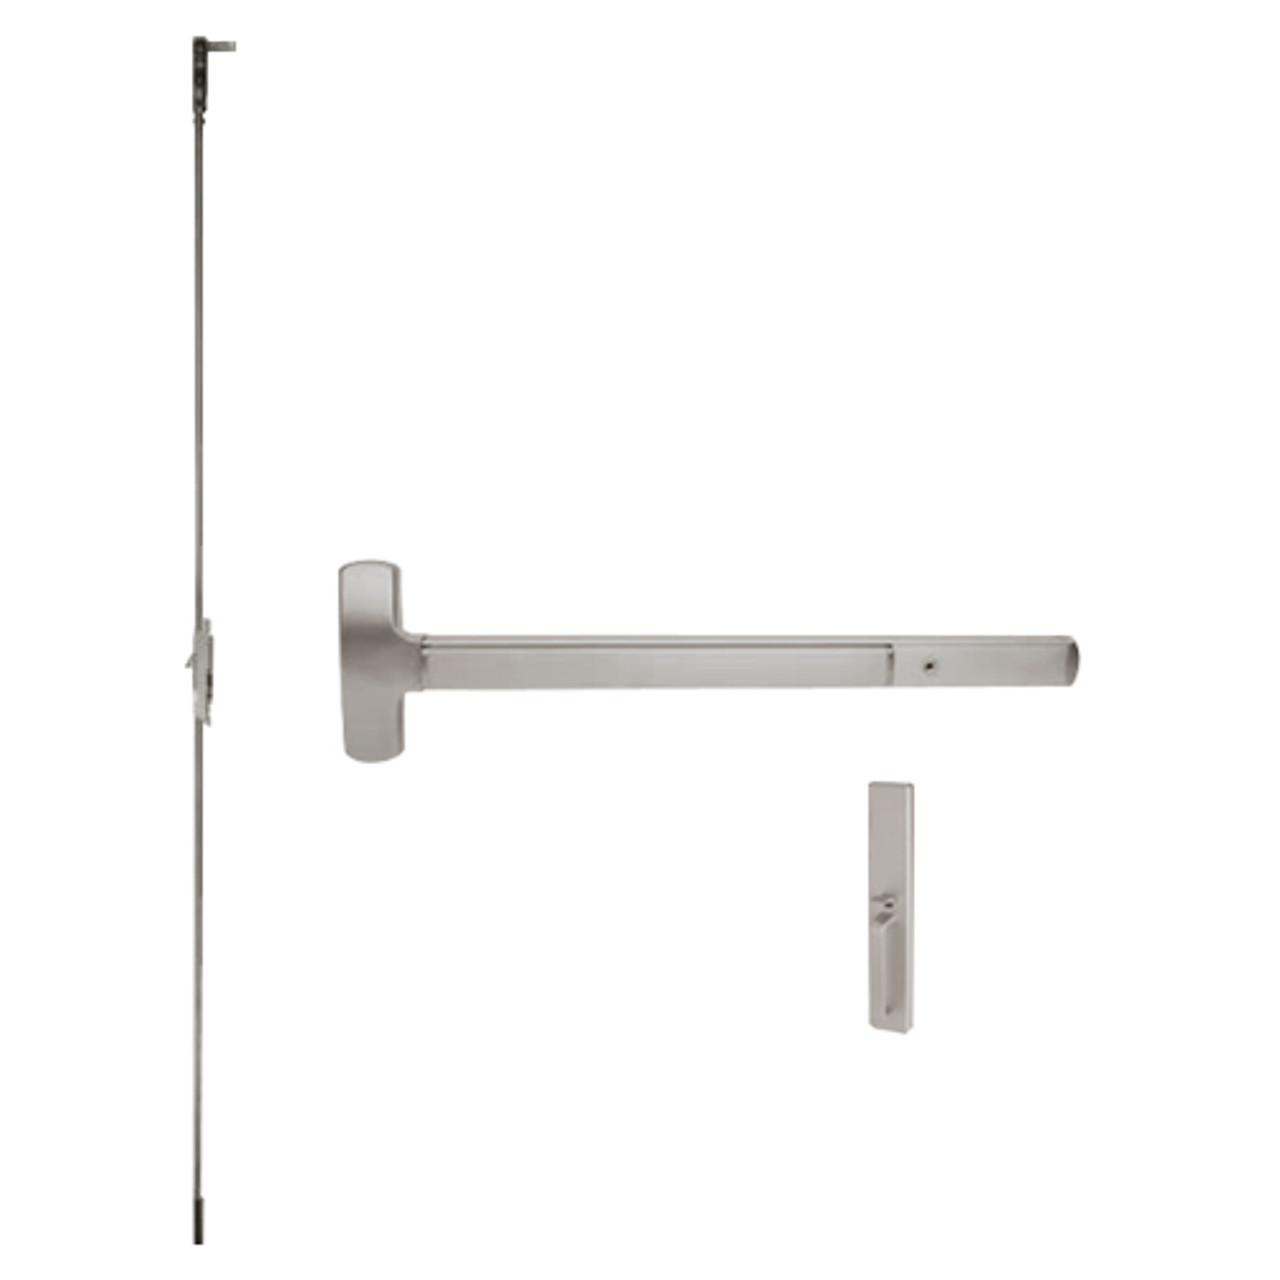 25-C-TP-BE-US32D-4 Falcon Exit Device in Satin Stainless Steel